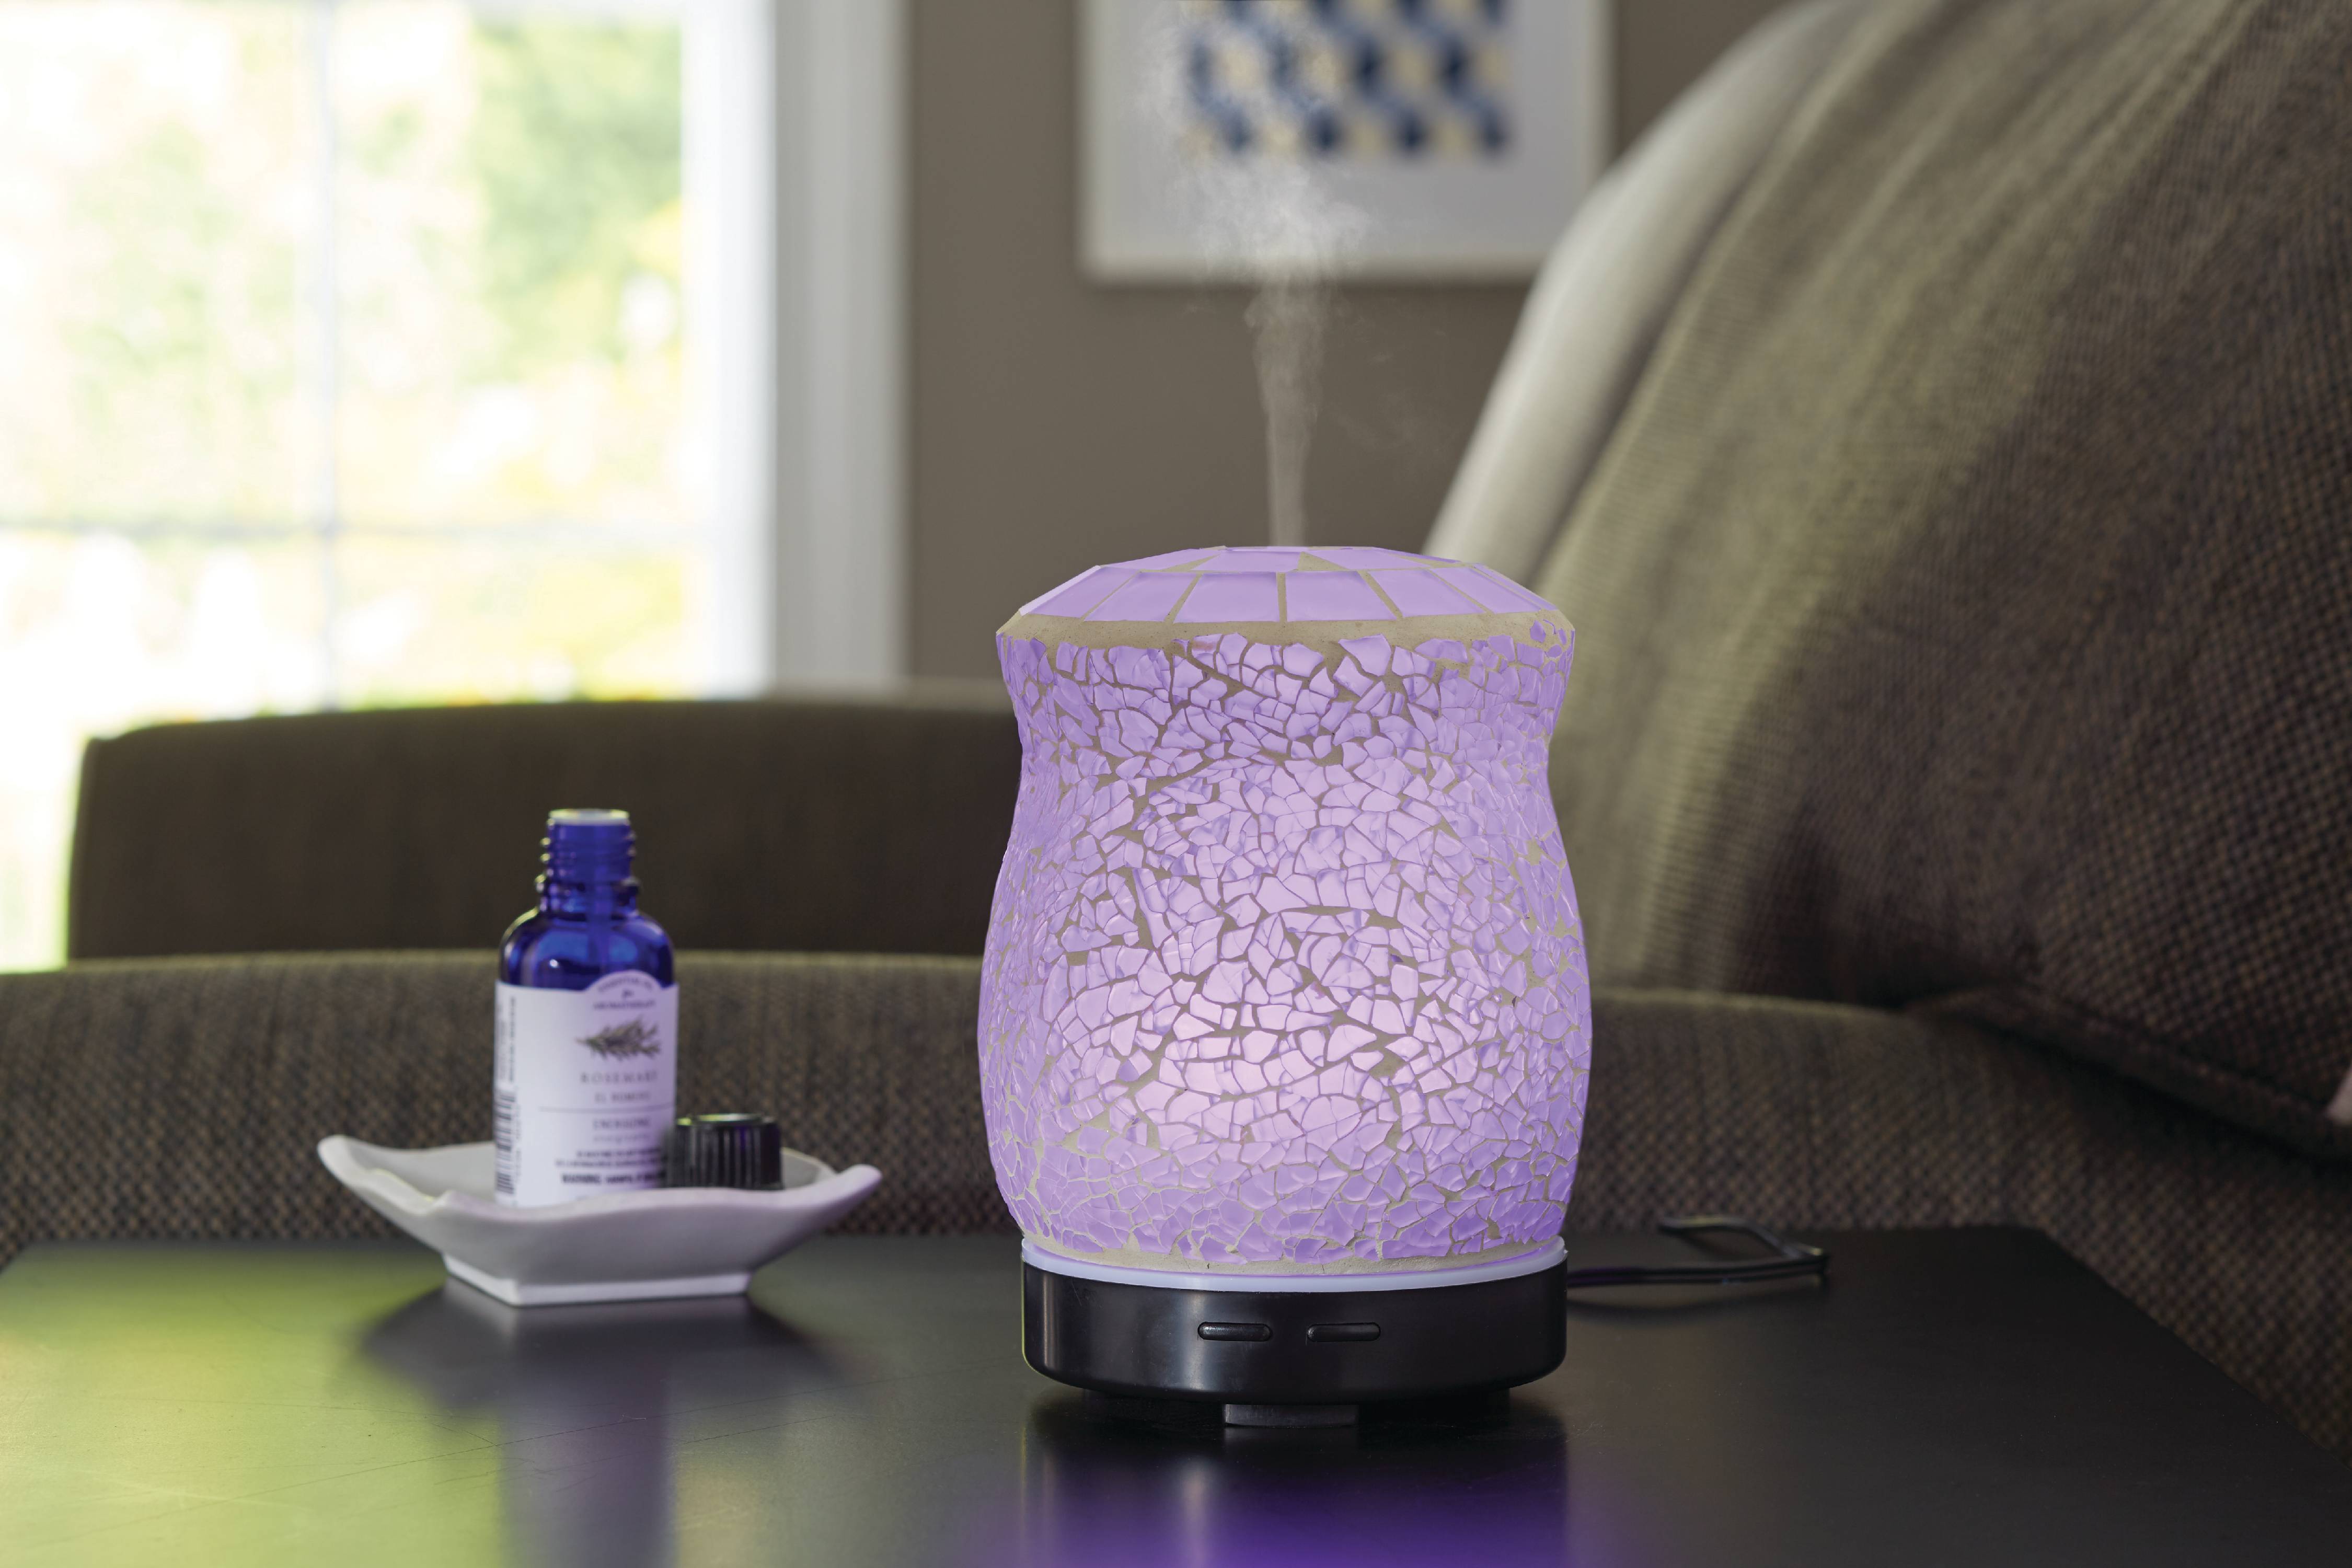 Better Homes & Gardens 3 Pieces Diffuser Gift Set, Crackled Mosaic, 100 mL - image 4 of 4